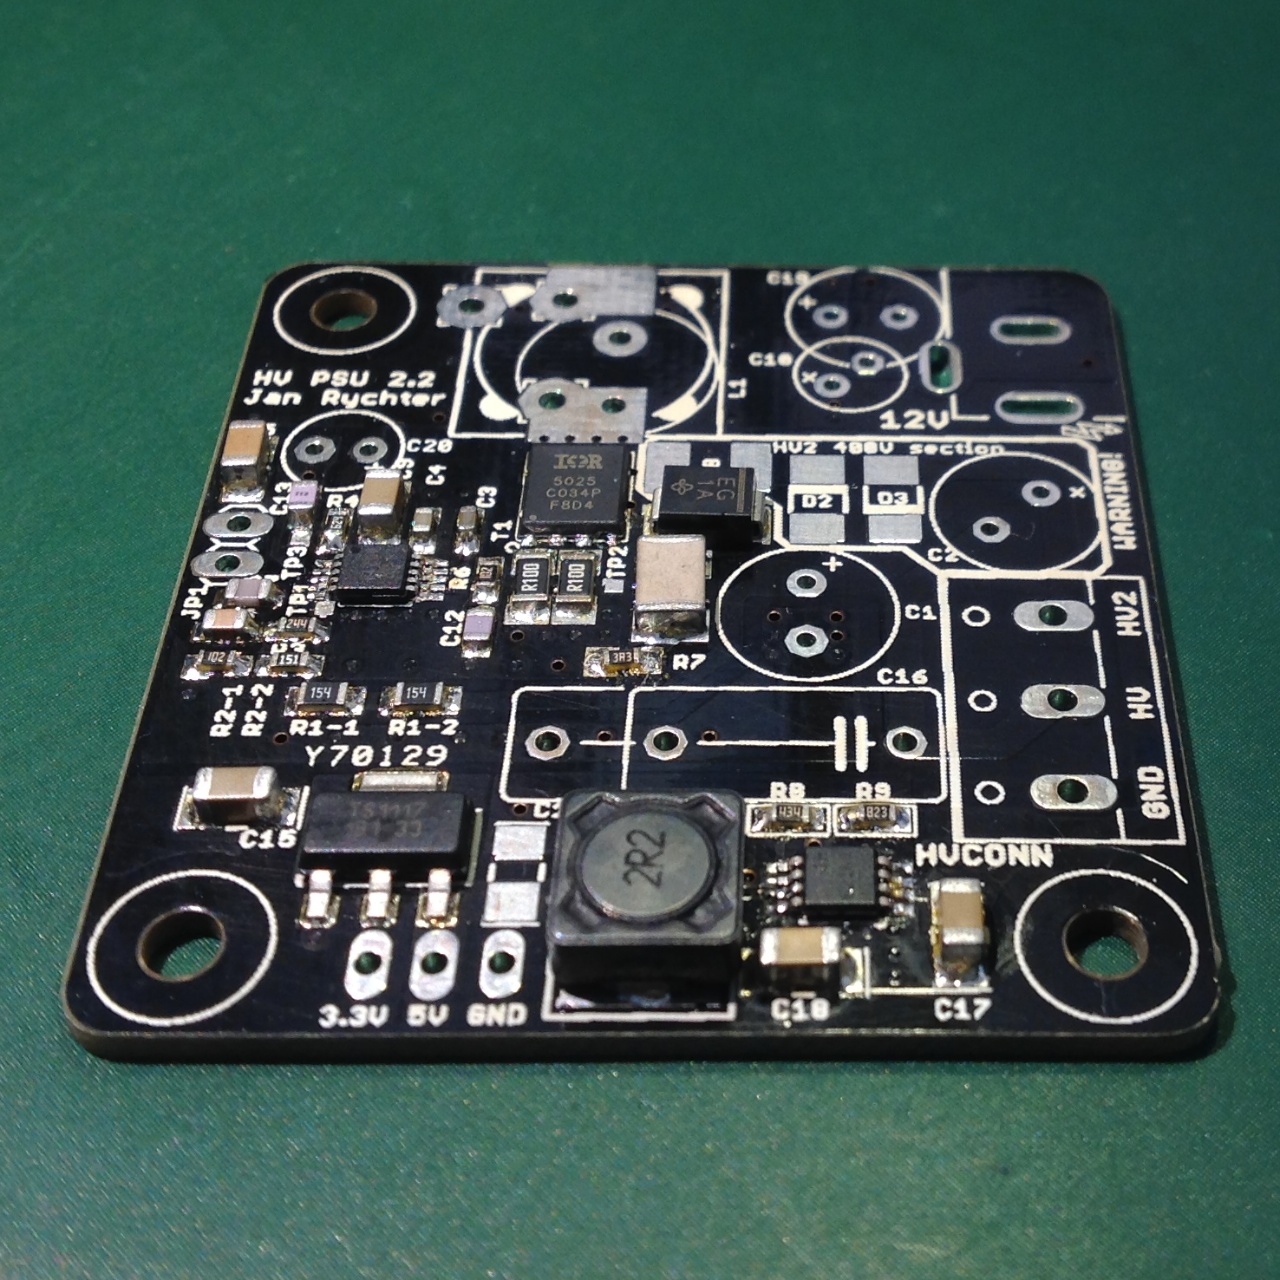 One of the units with SMD components mounted, fresh from the oven.